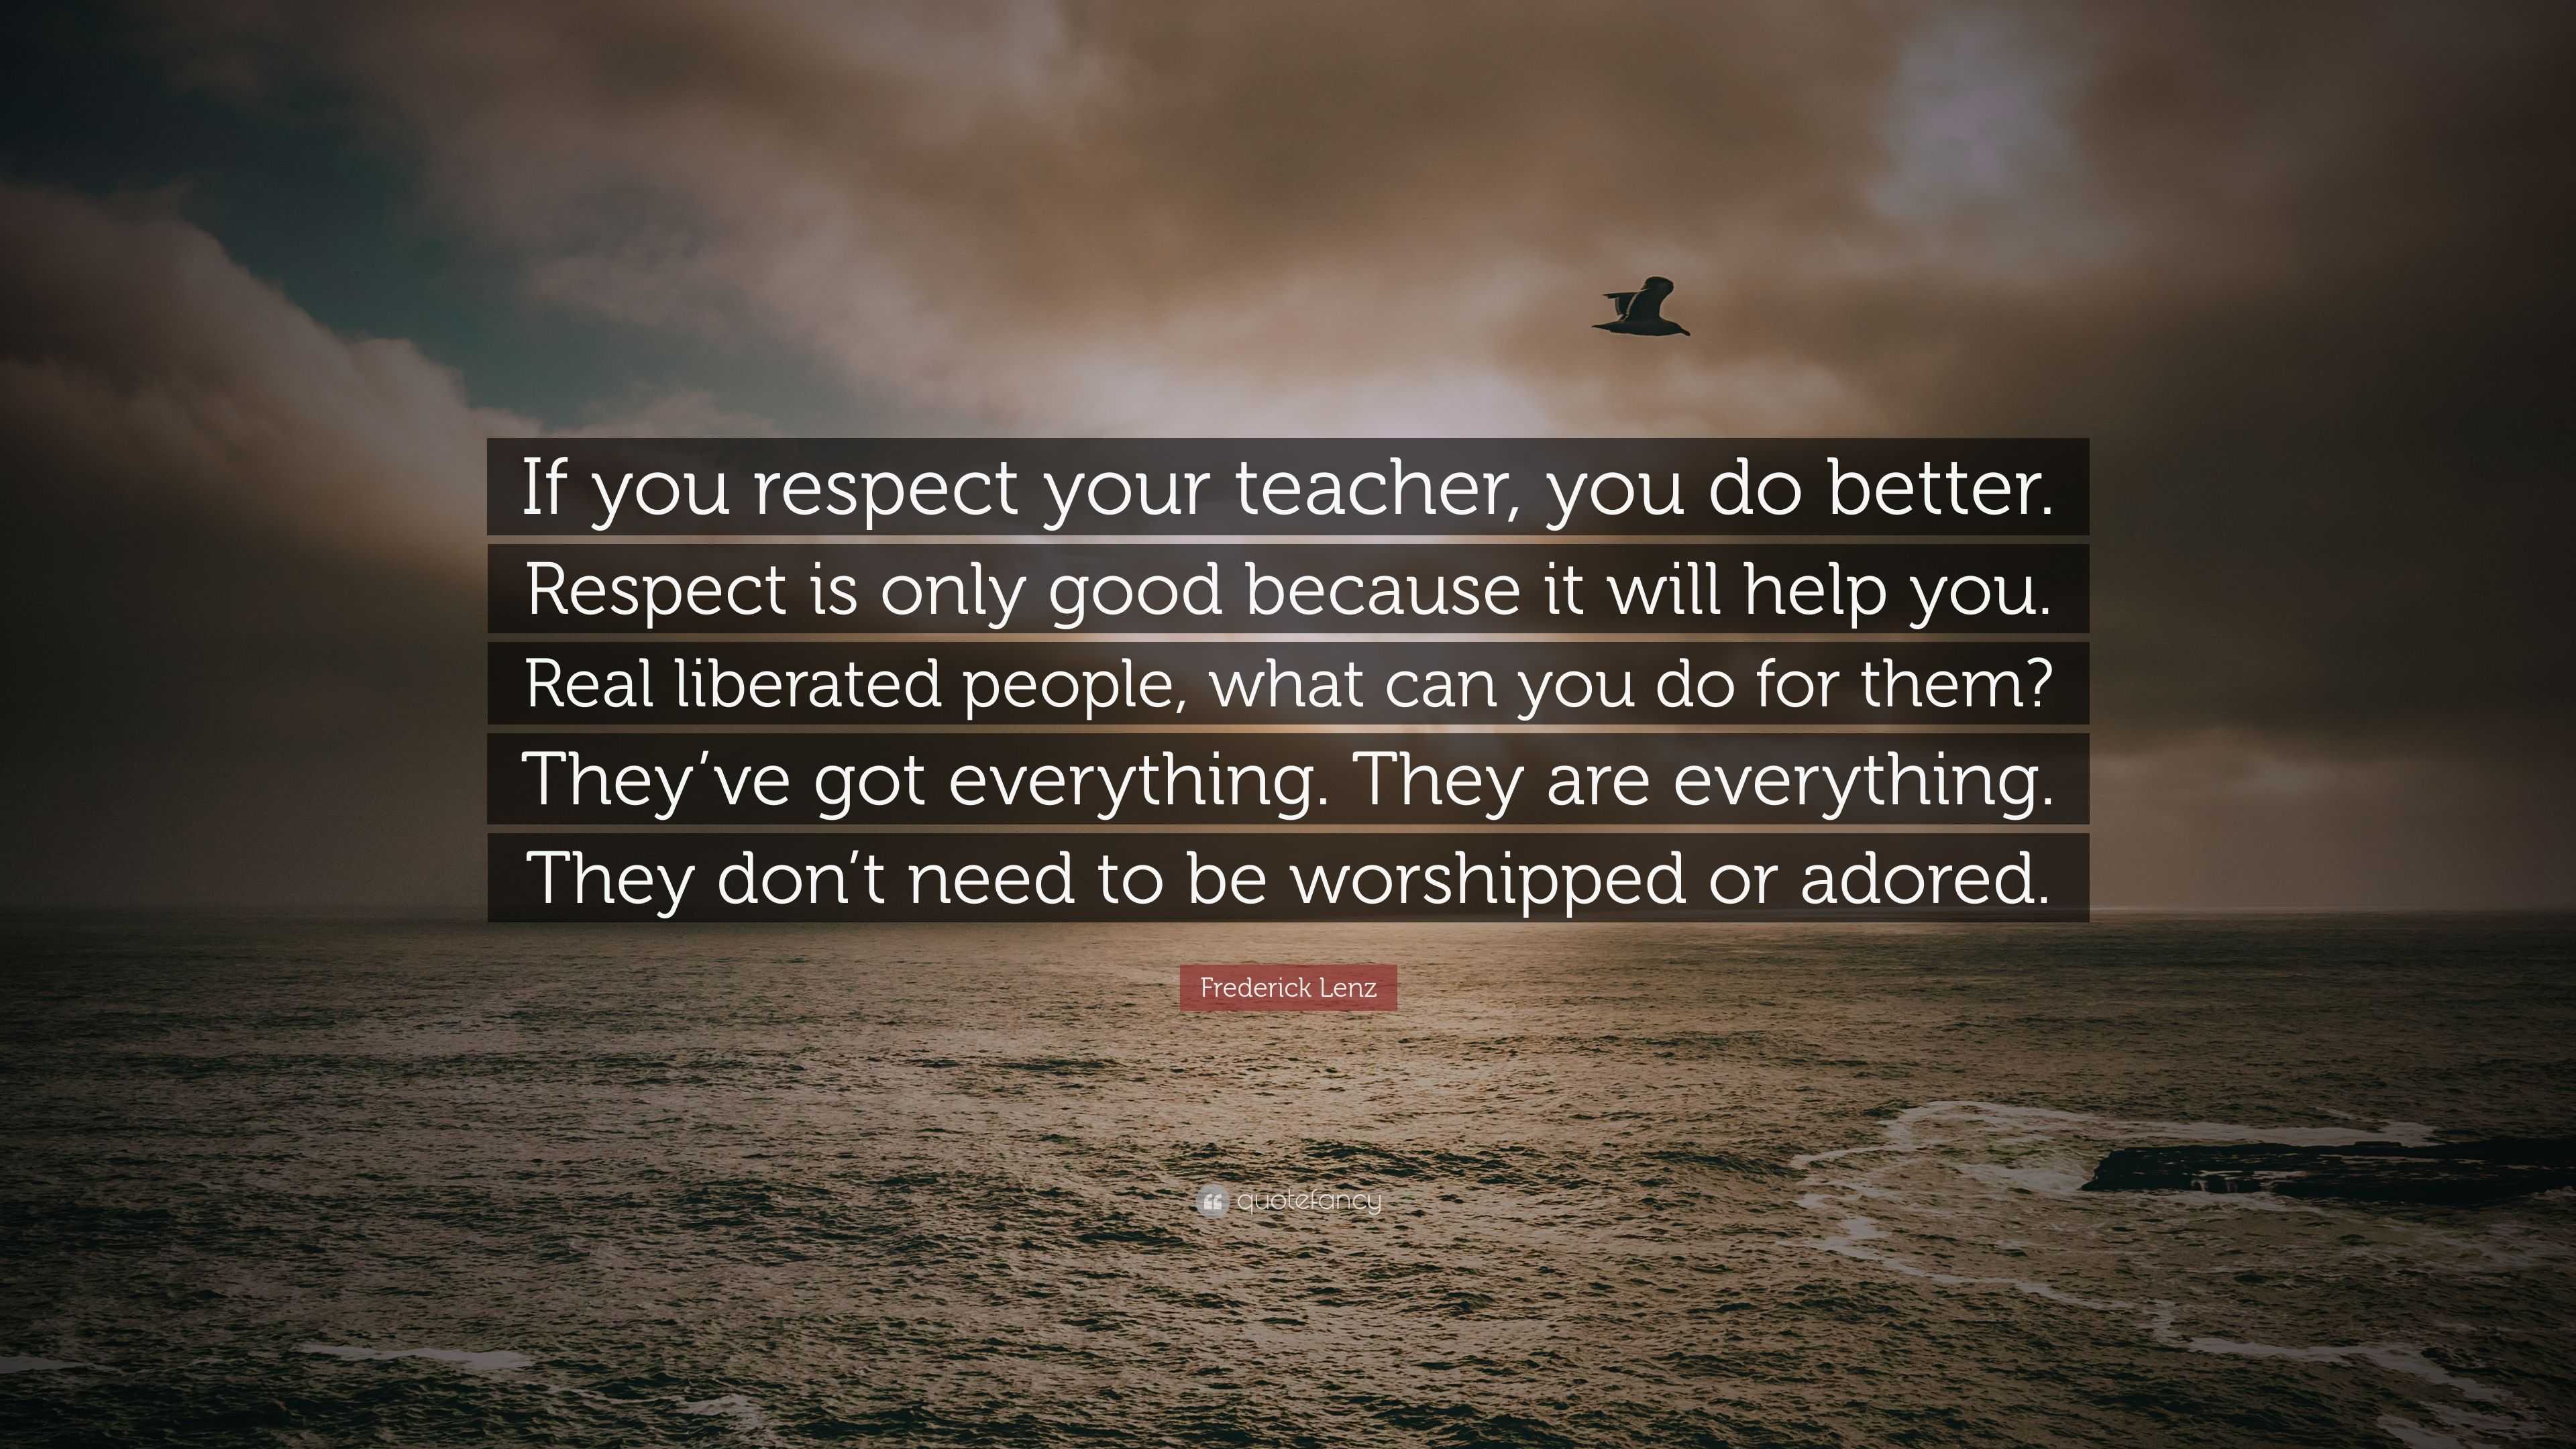 Frederick Lenz Quote: “If you respect your teacher, you do better